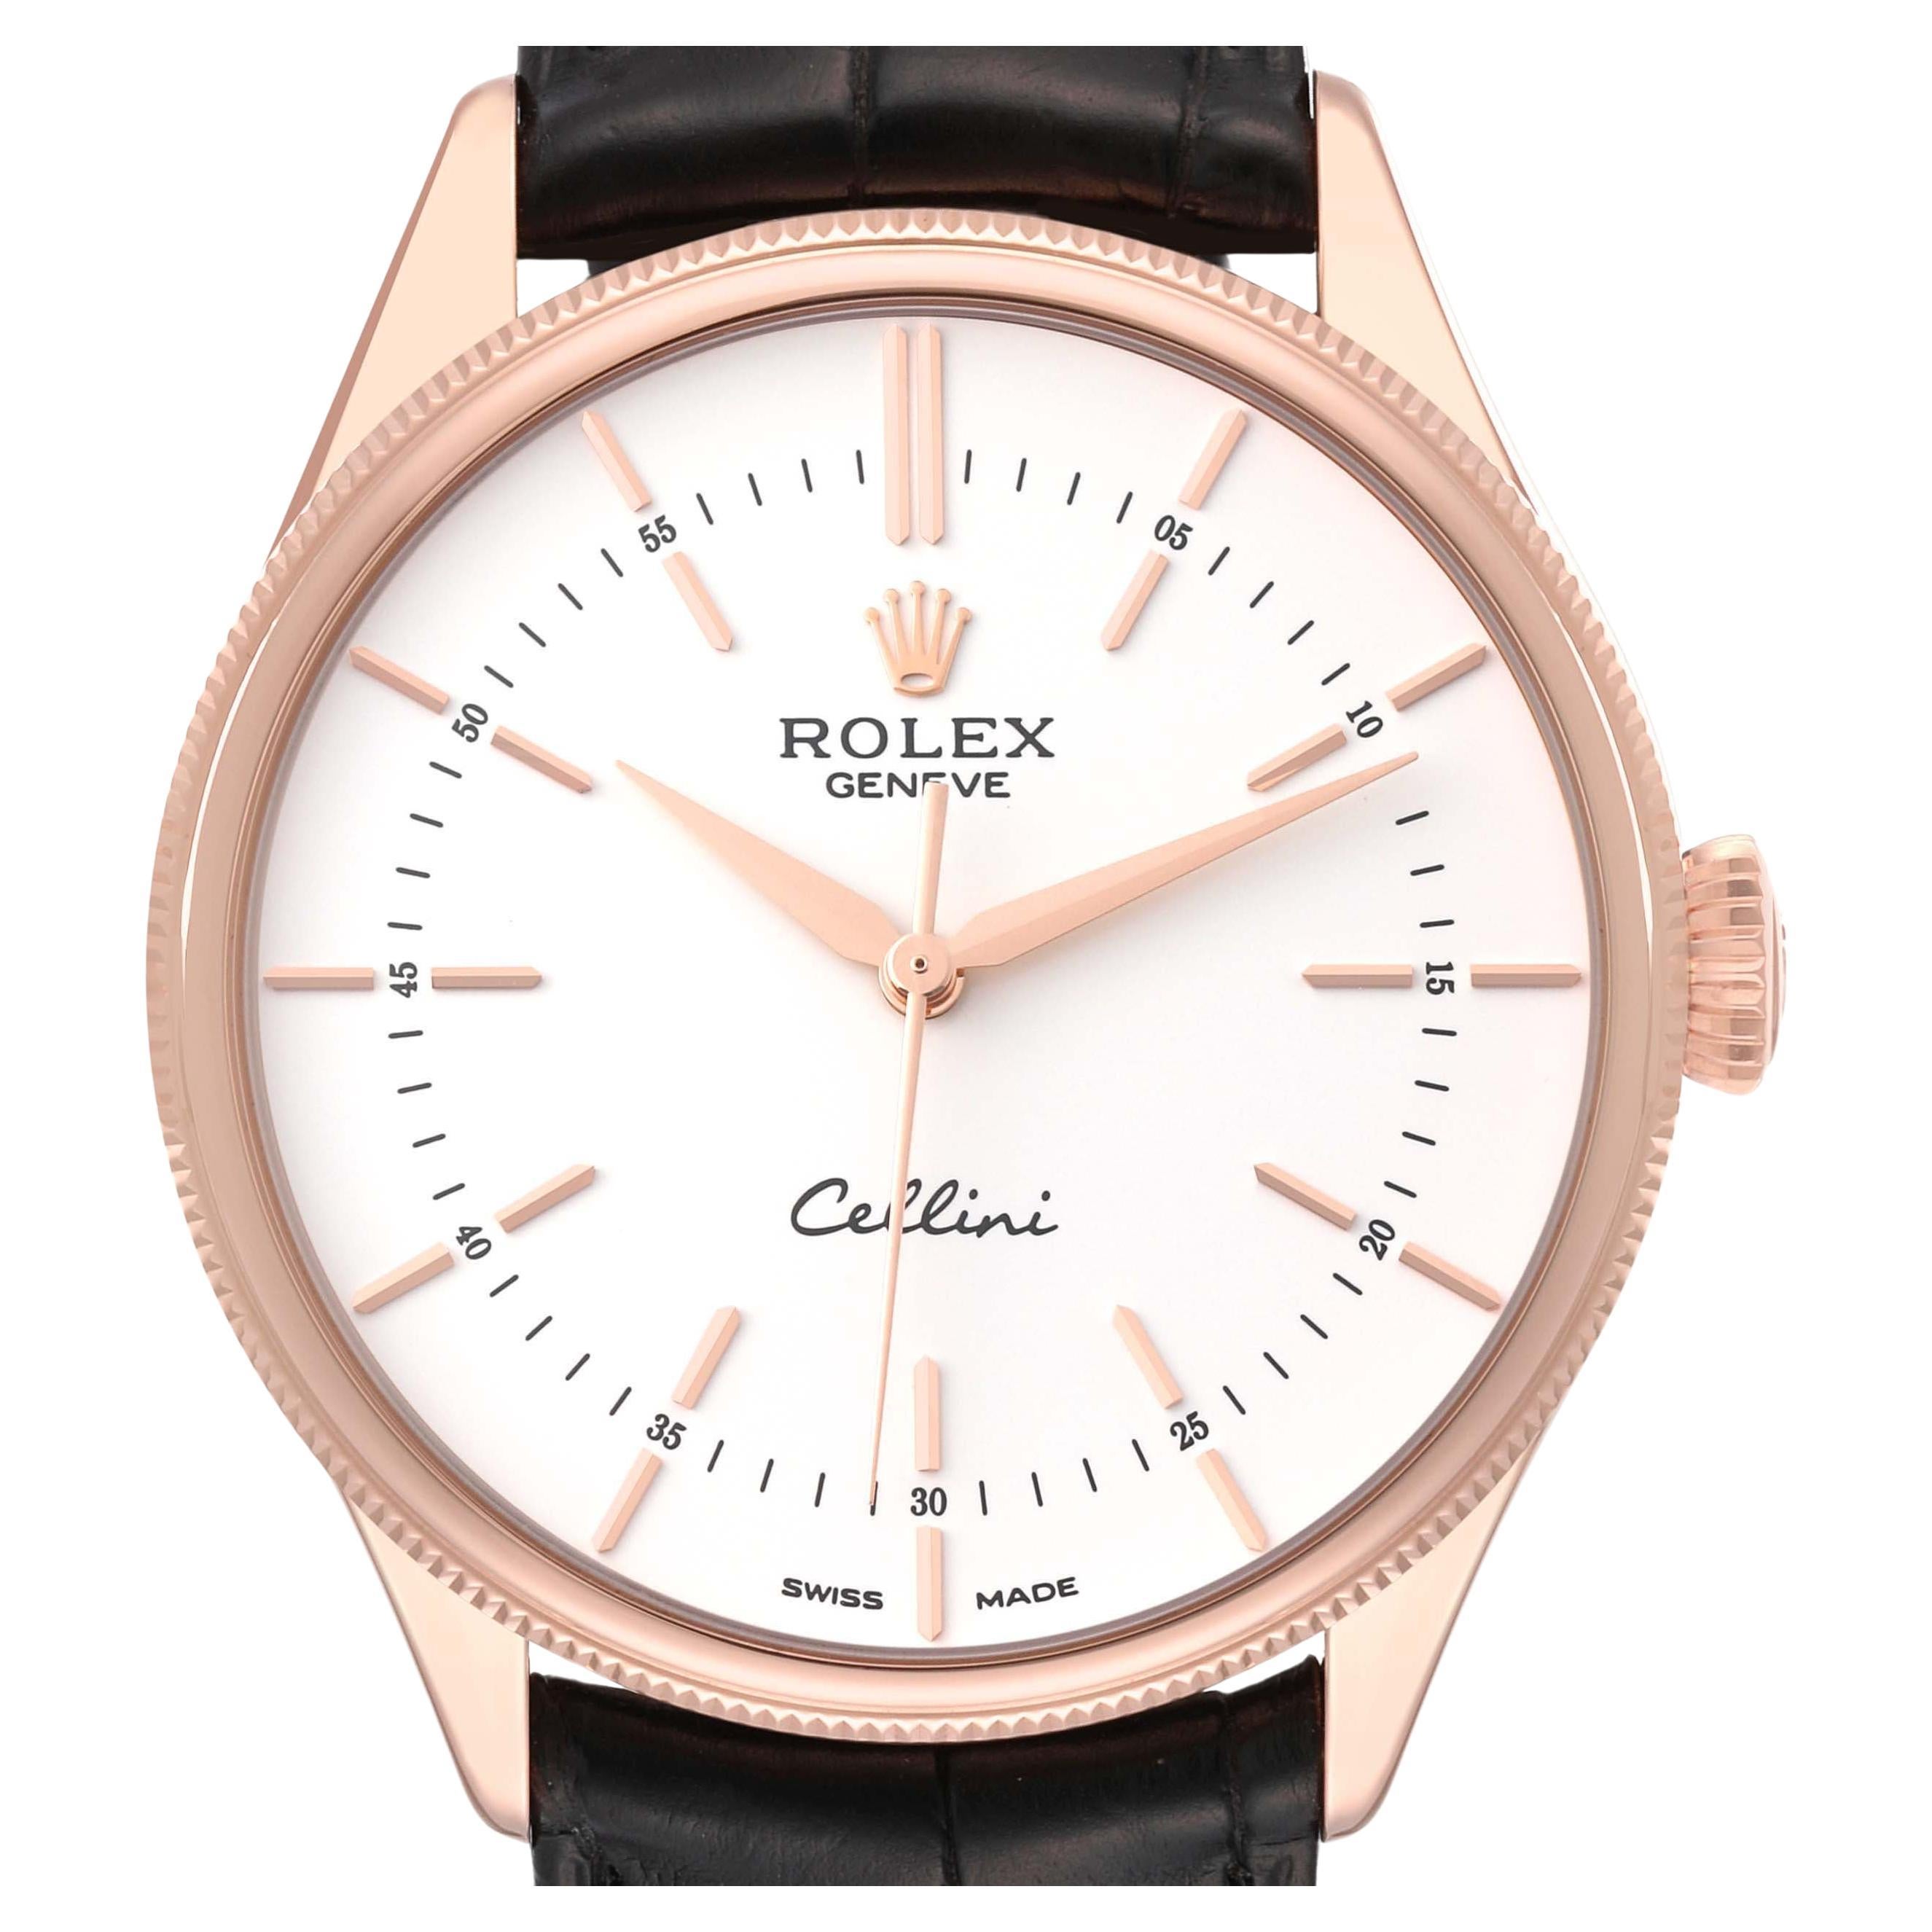 Rolex Cellini Time White Dial Rose Gold Mens Watch 50505